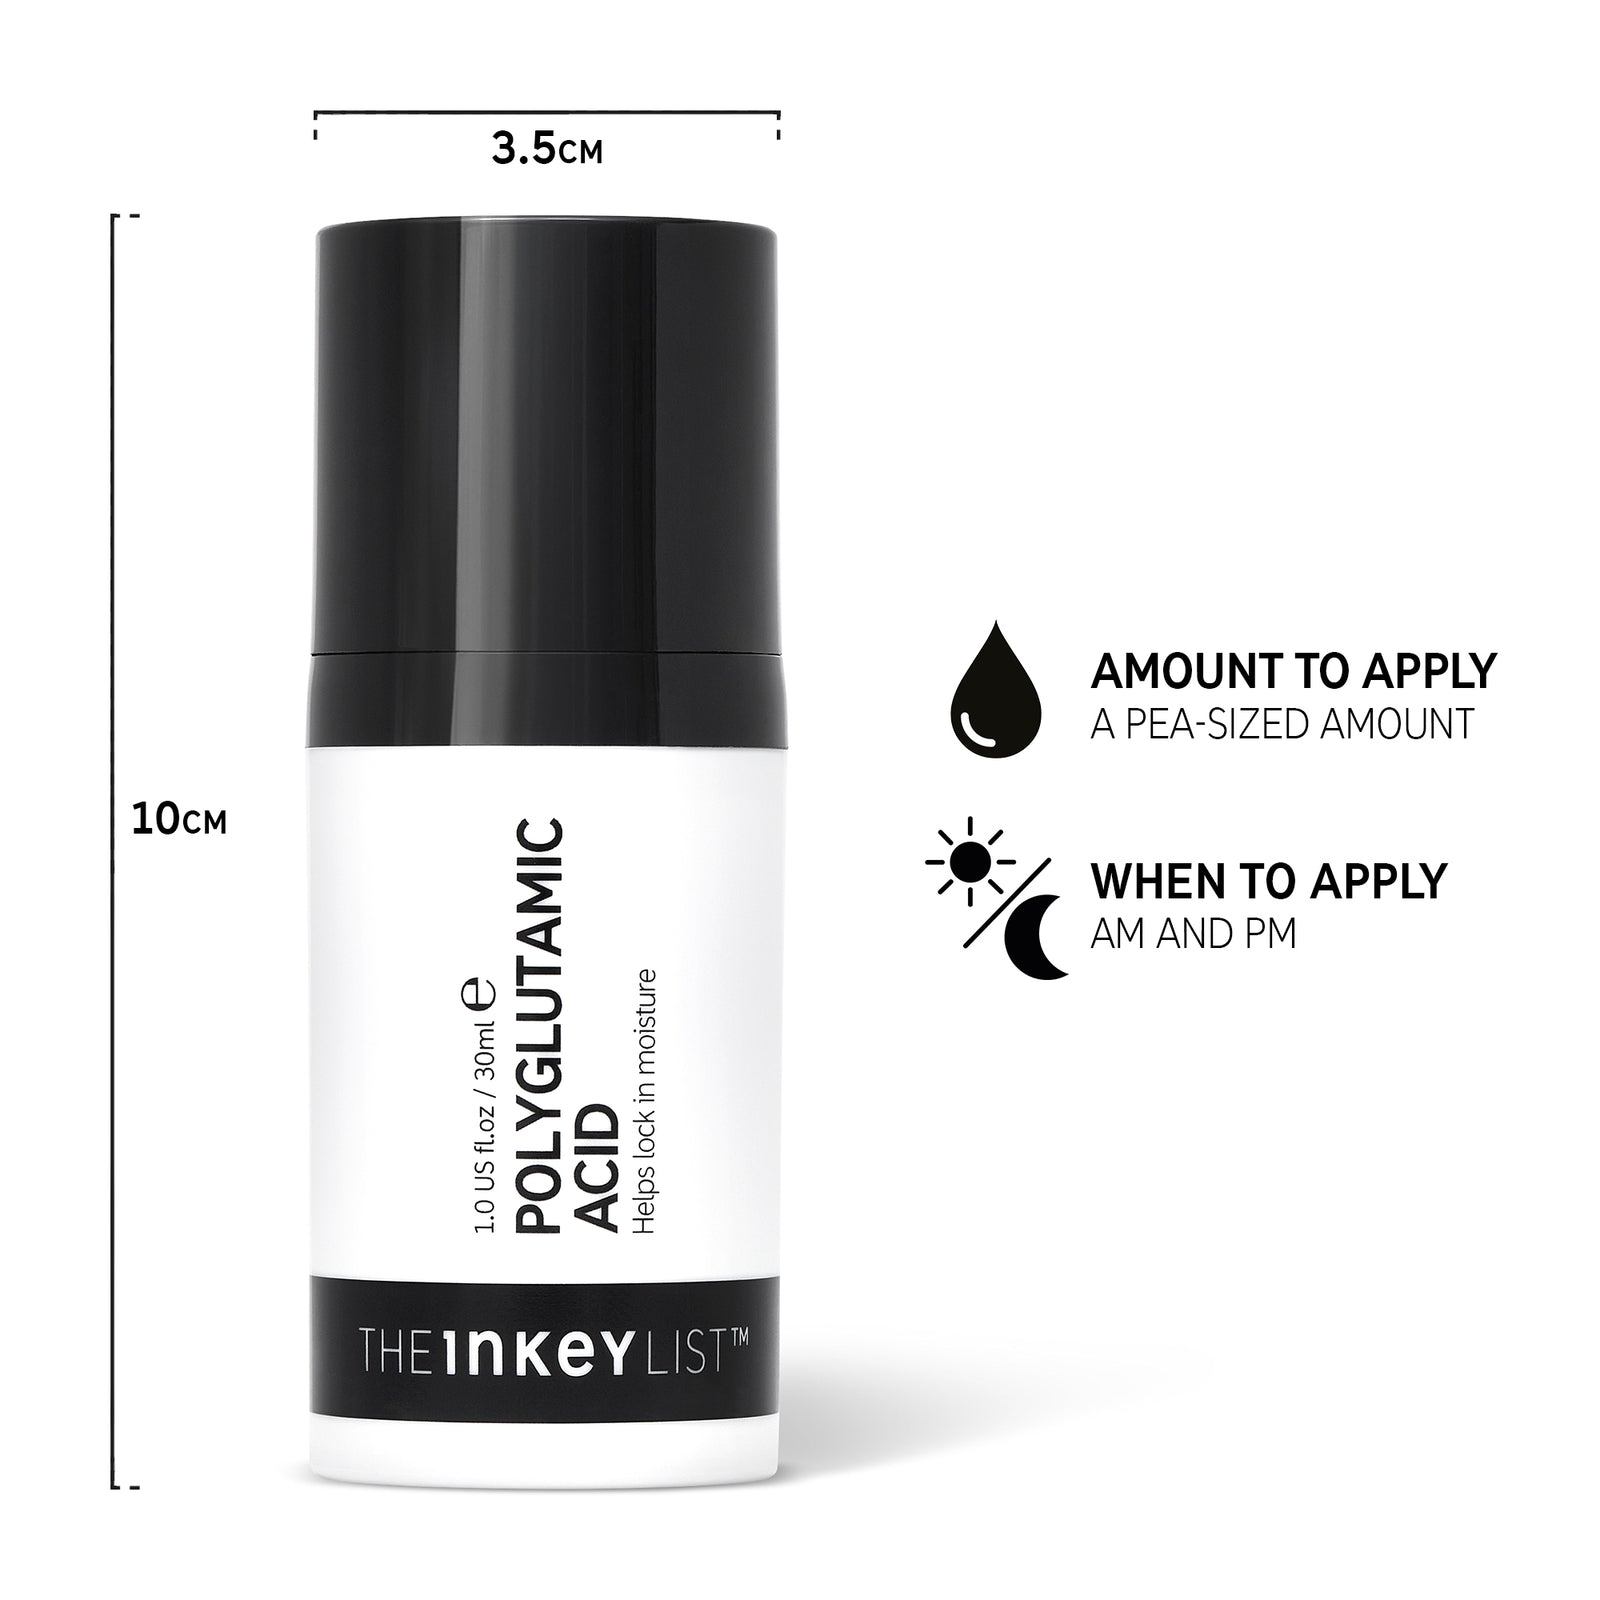 Polyglutamic Acid Serum with text overlay 'Amount to apply (pea-sized amount)' and 'When to apply (AM and PM)'